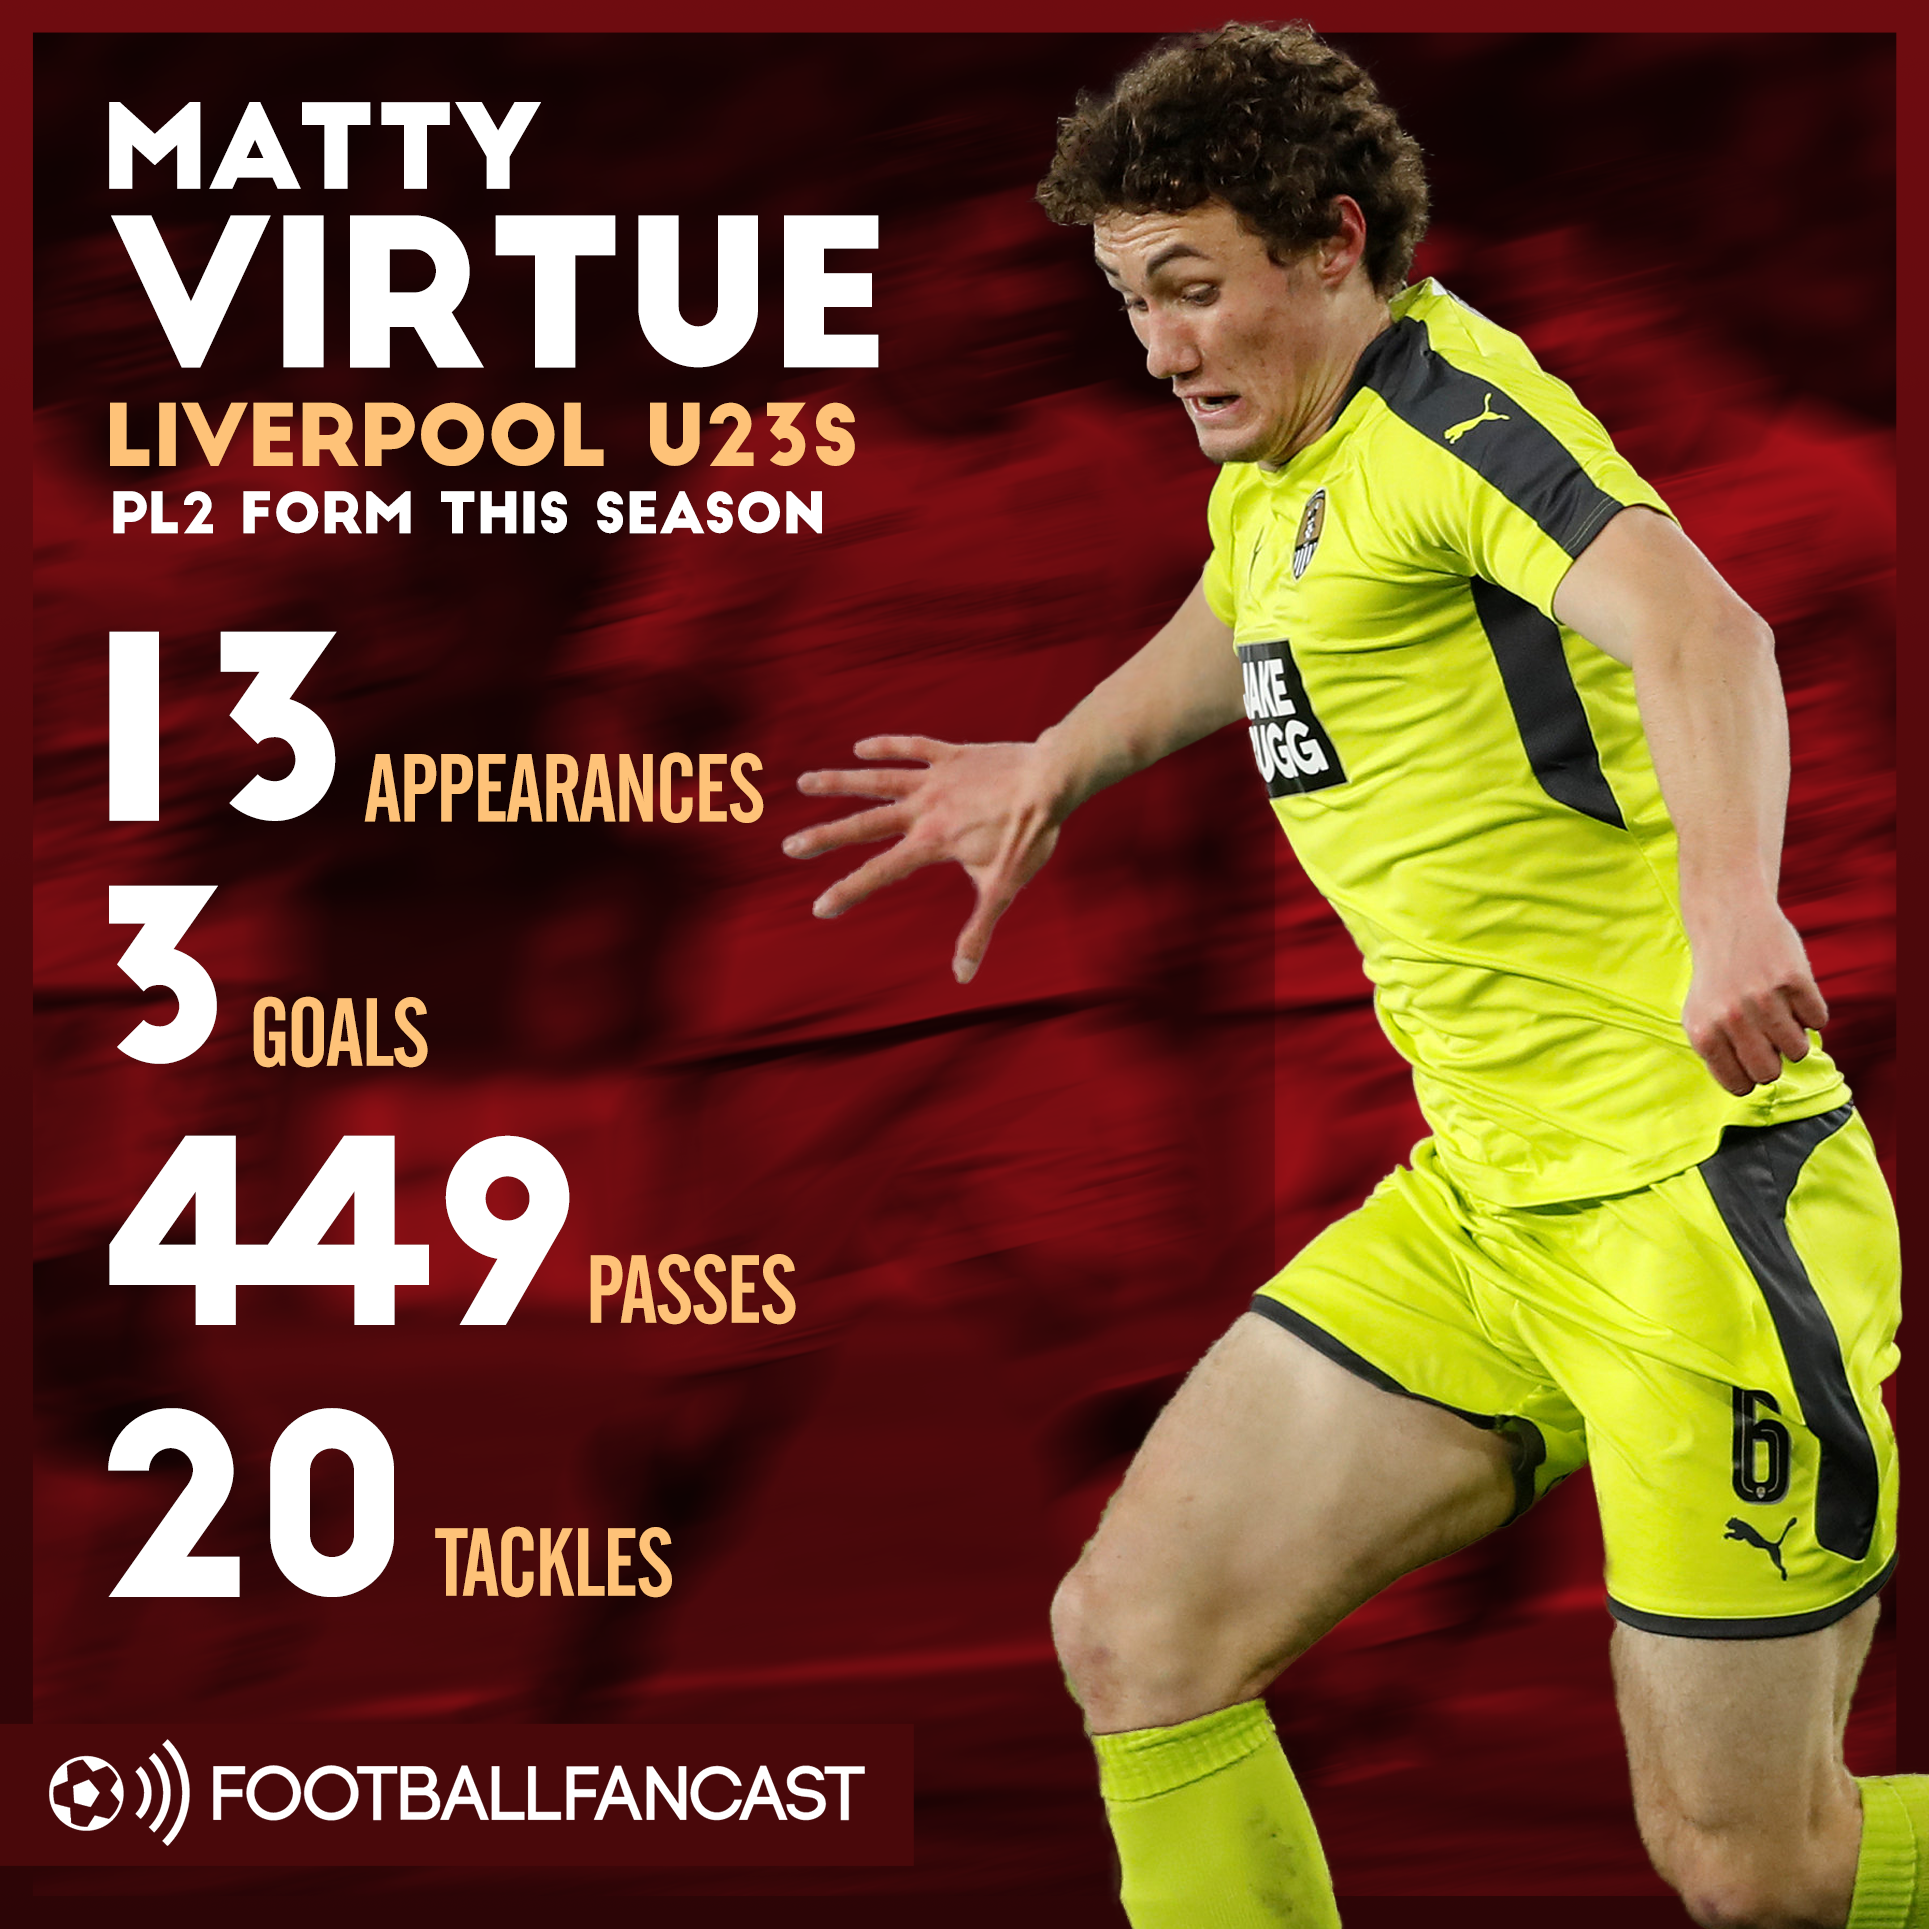 Matty Virtue's PL2 stats for Liverpool